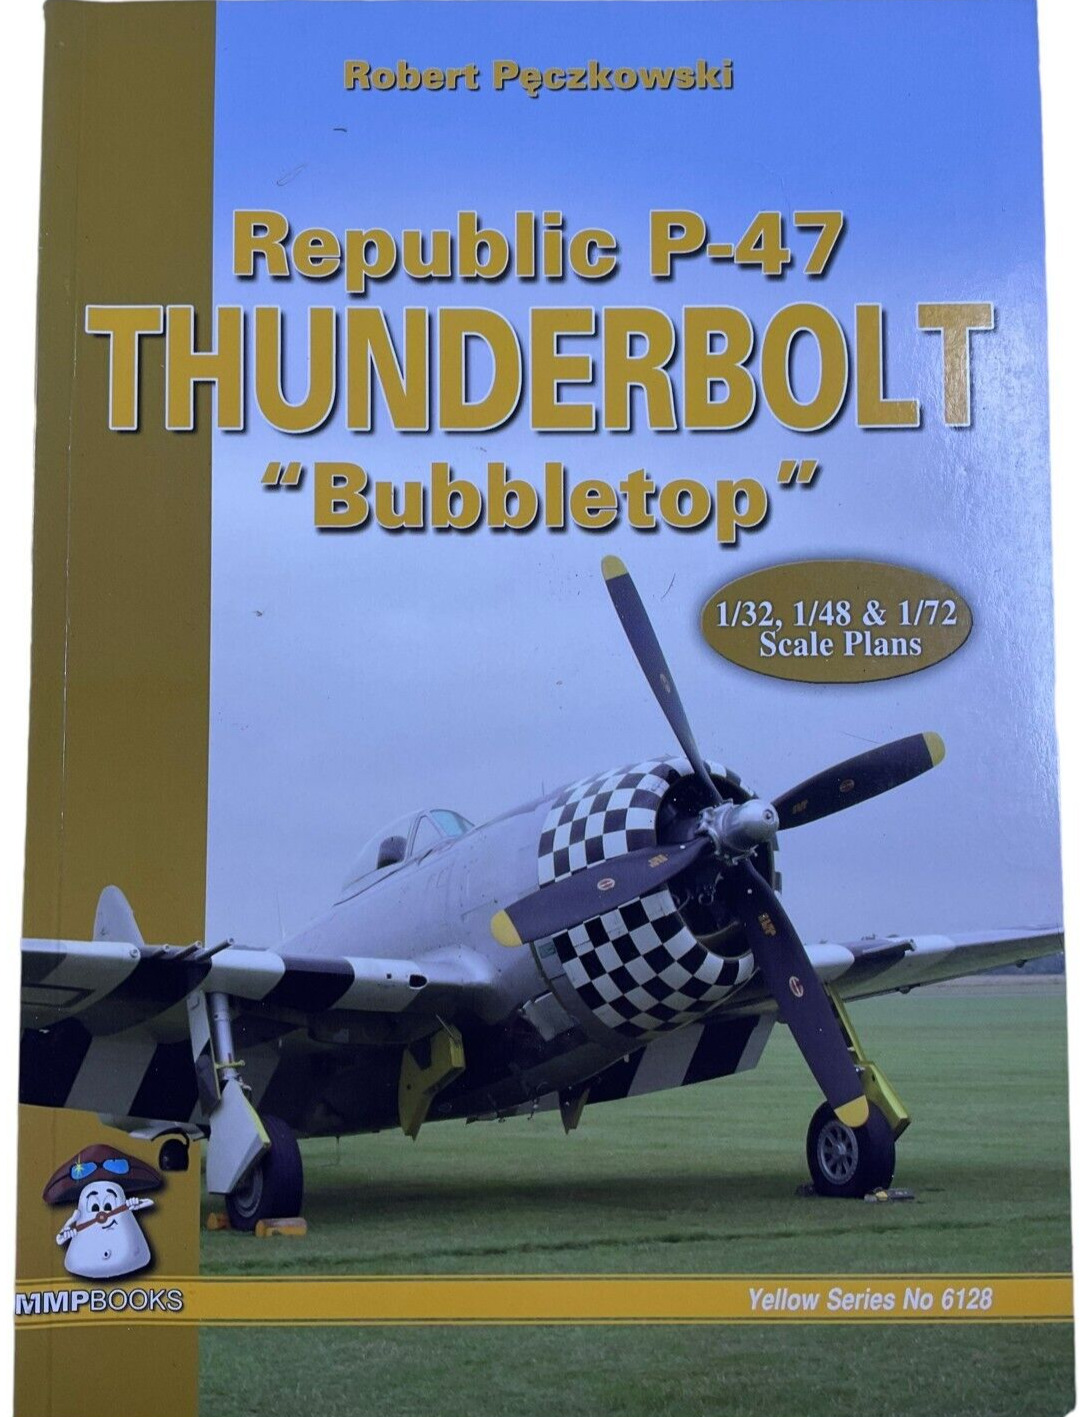 WW2 US USAAF Republic P-47 Thunderbolt Bubbletop Softcover Reference Book